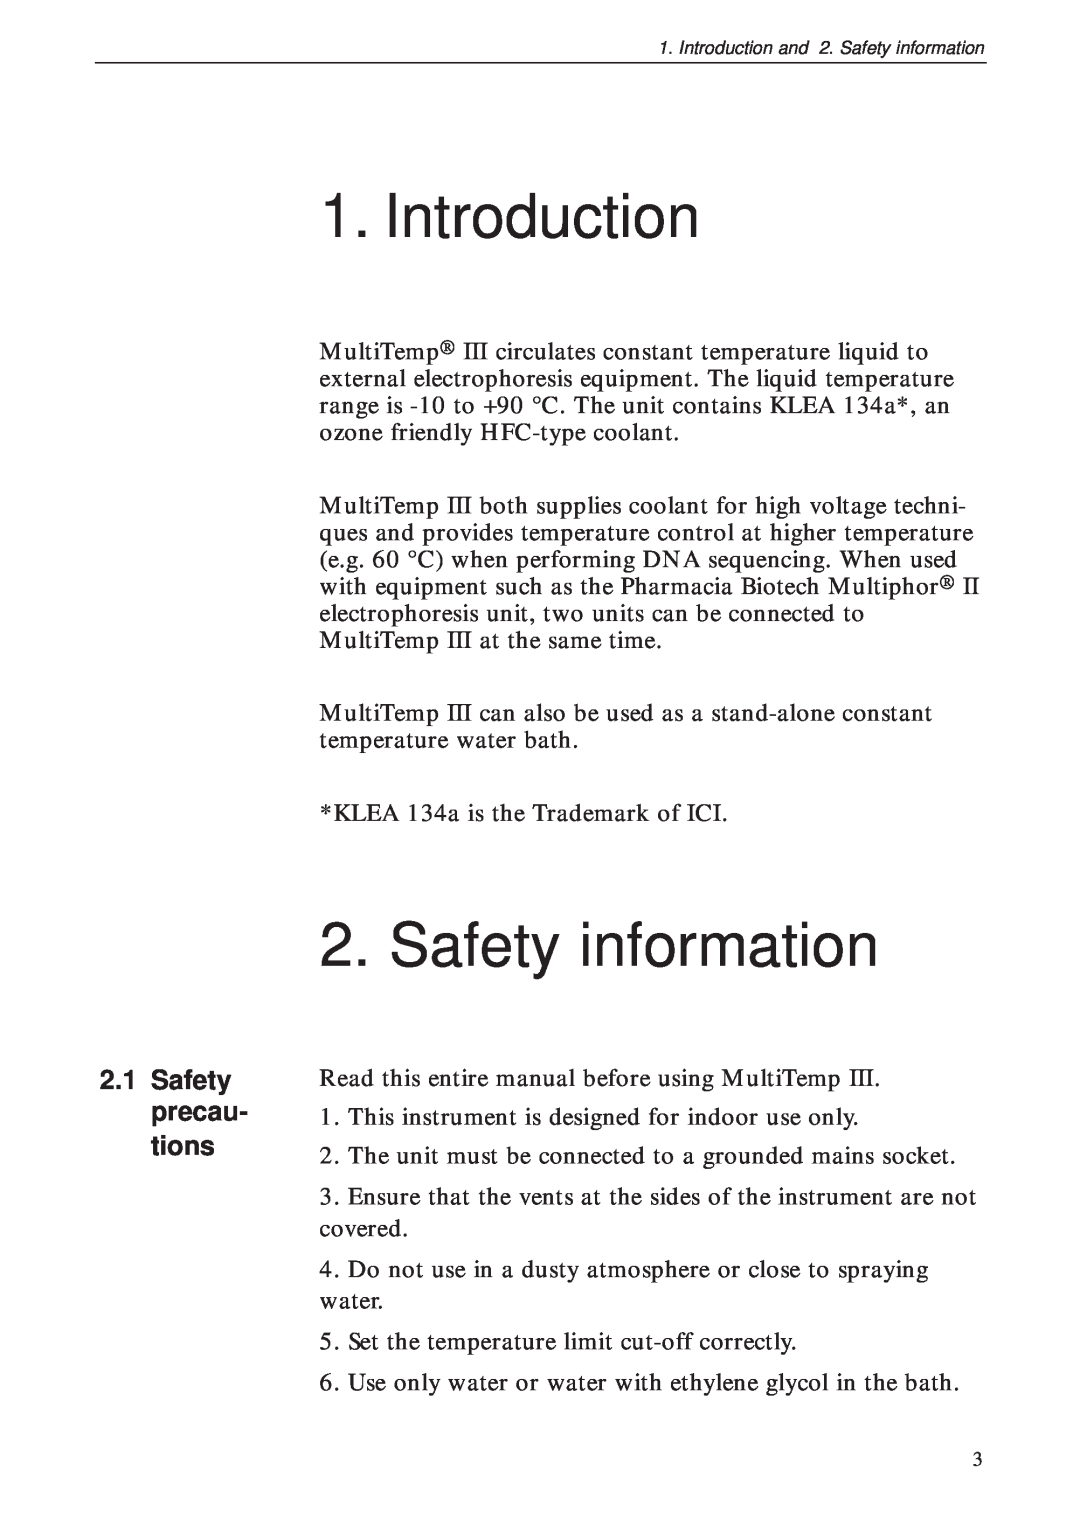 TRENDnet 18-1106-33 user manual Introduction, Safety information, Safety precau- tions 